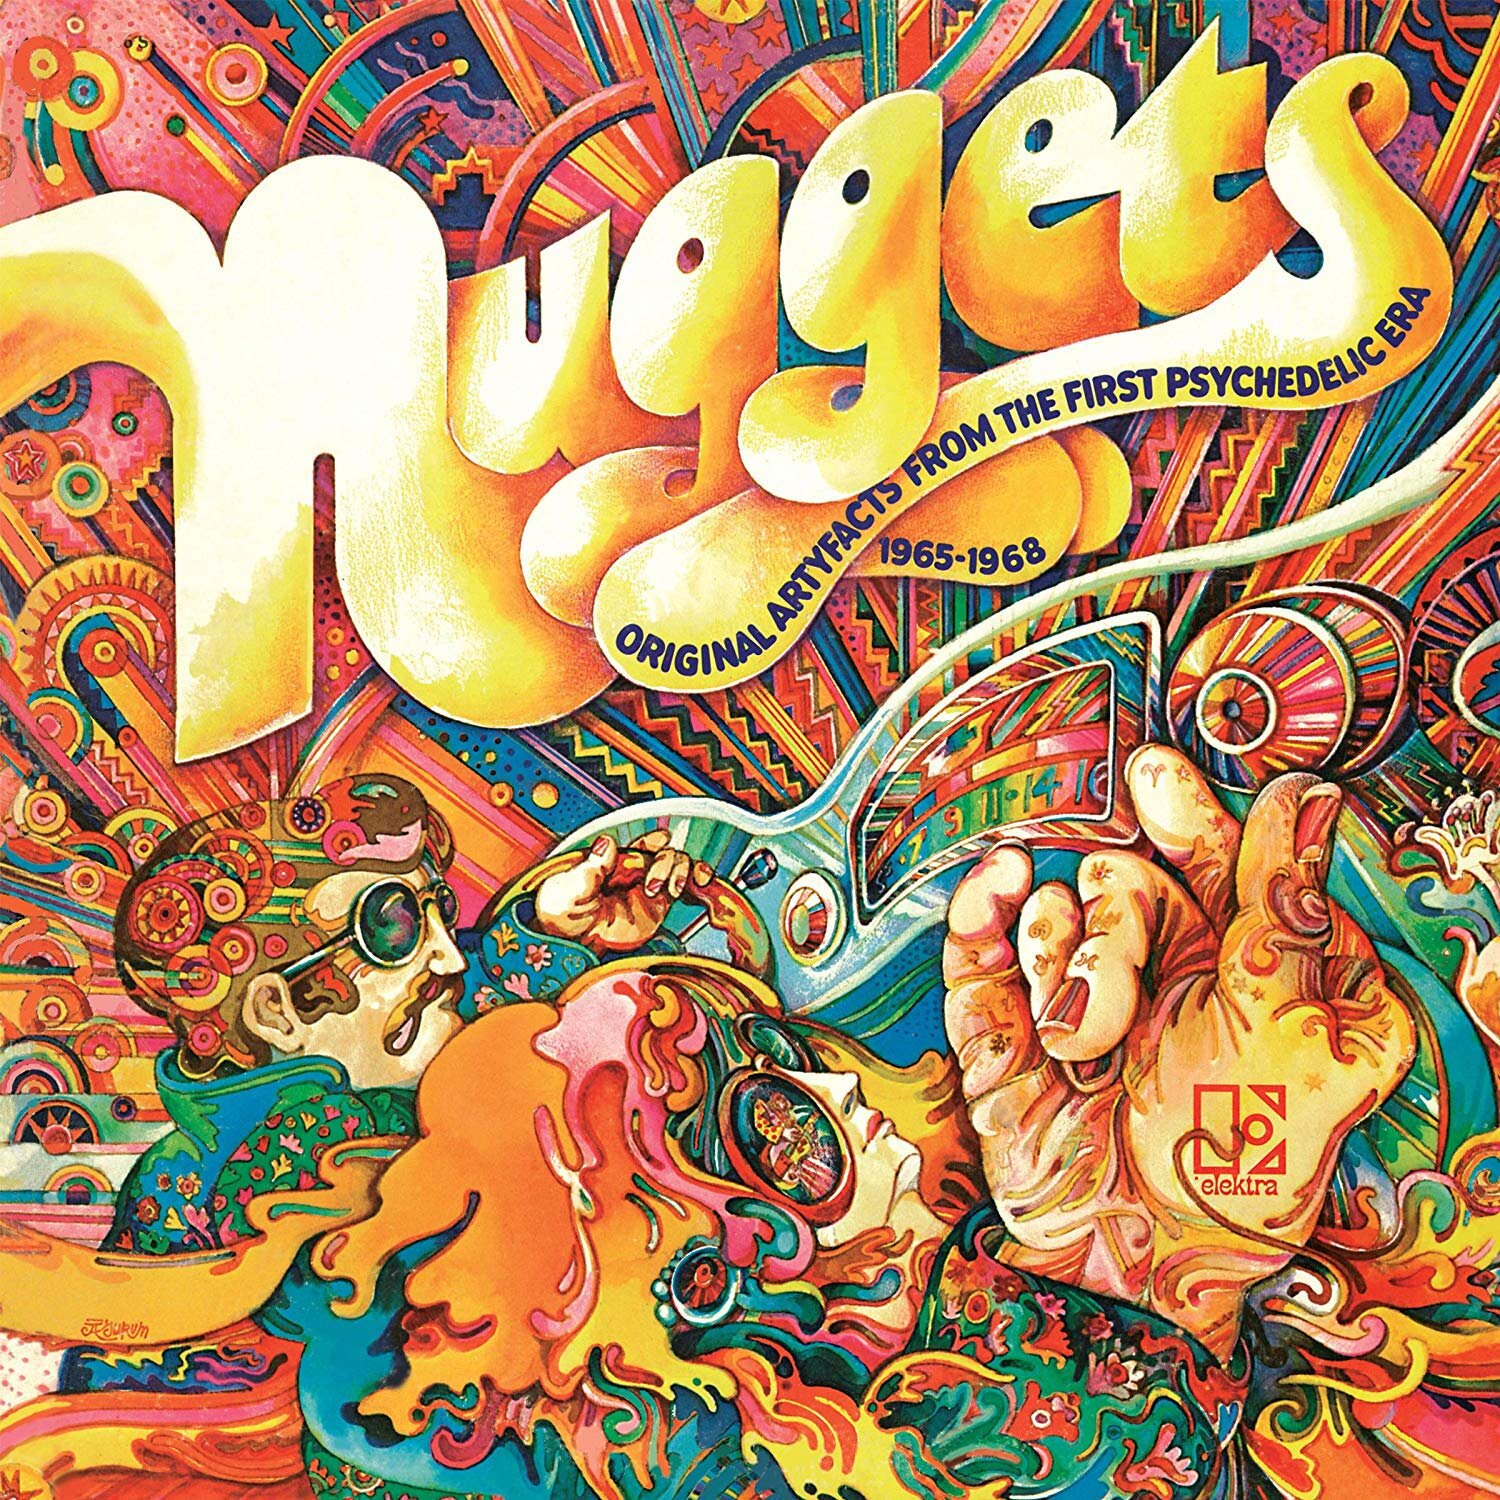 v/a - Nuggets: Original Artyfacts From The First Psychedelic Era